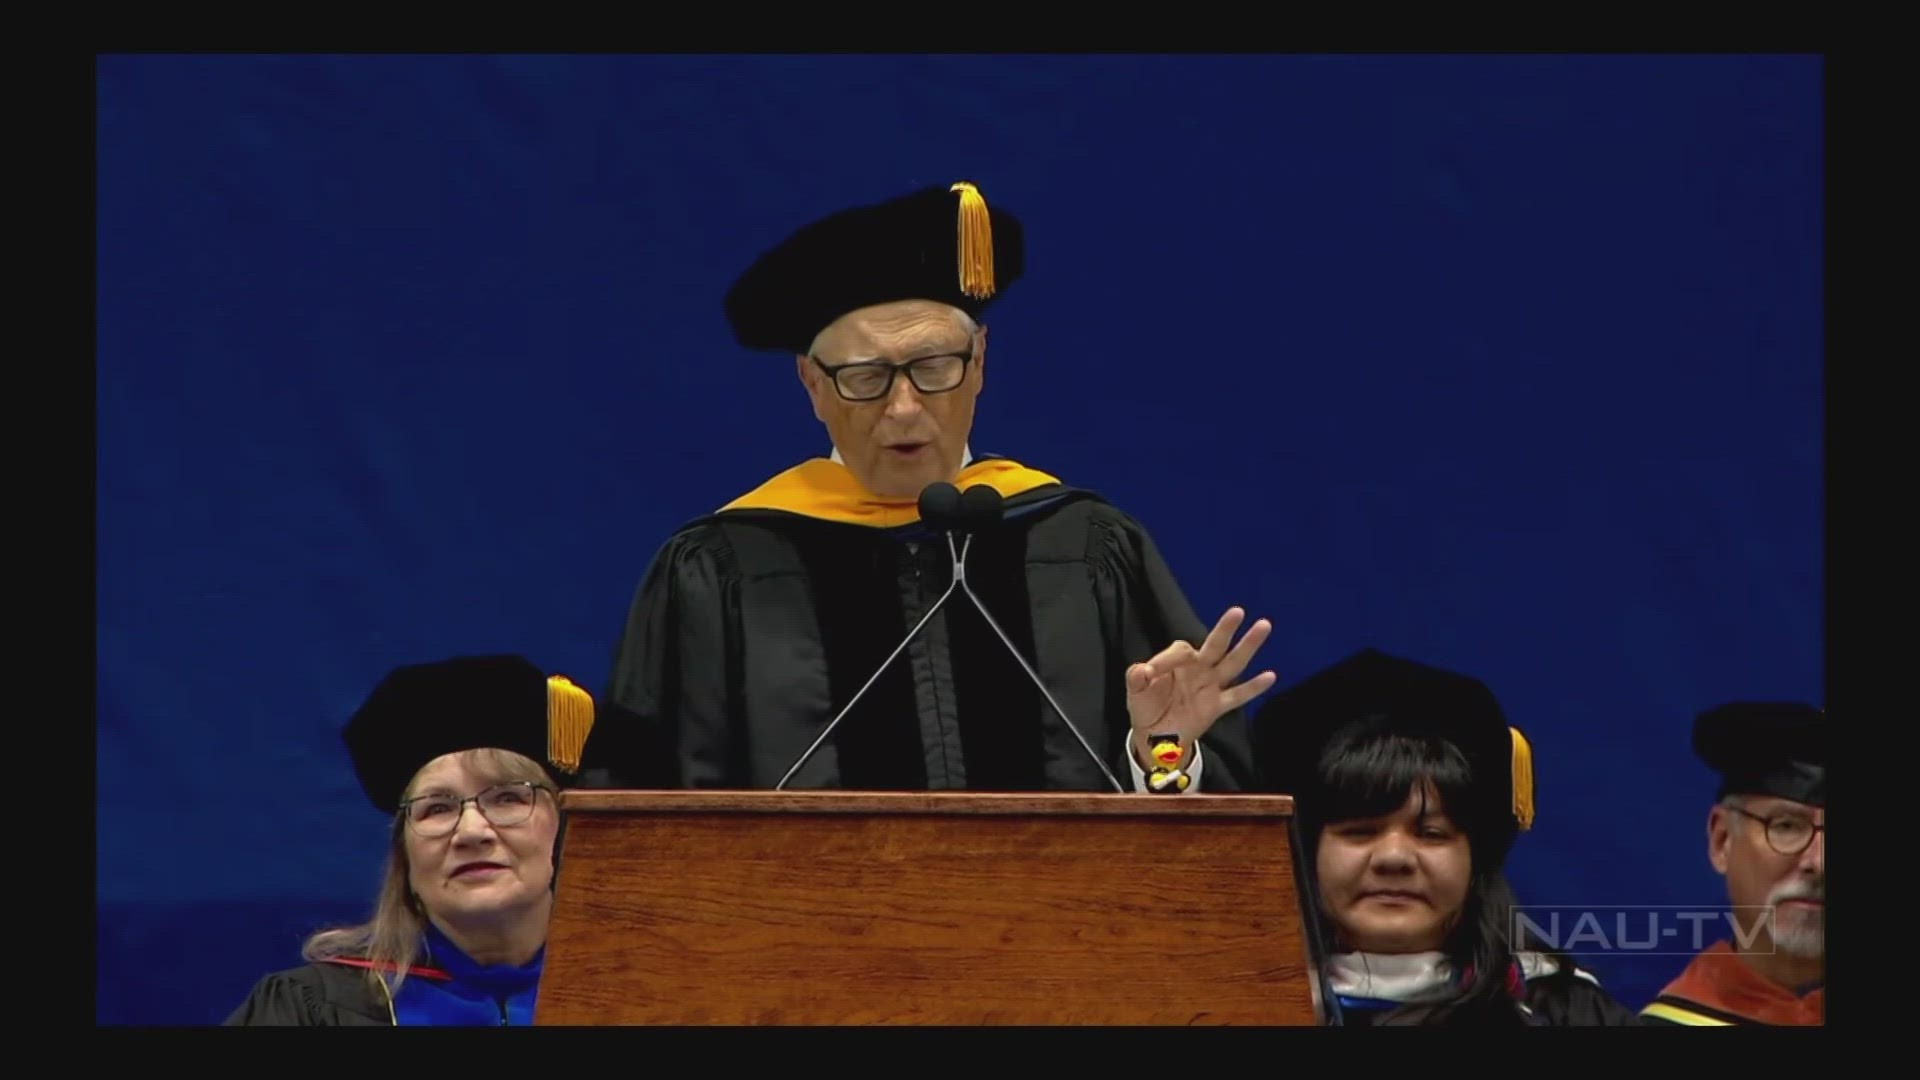 Bill Gates discusses climate, wealth gap at NAU commencement